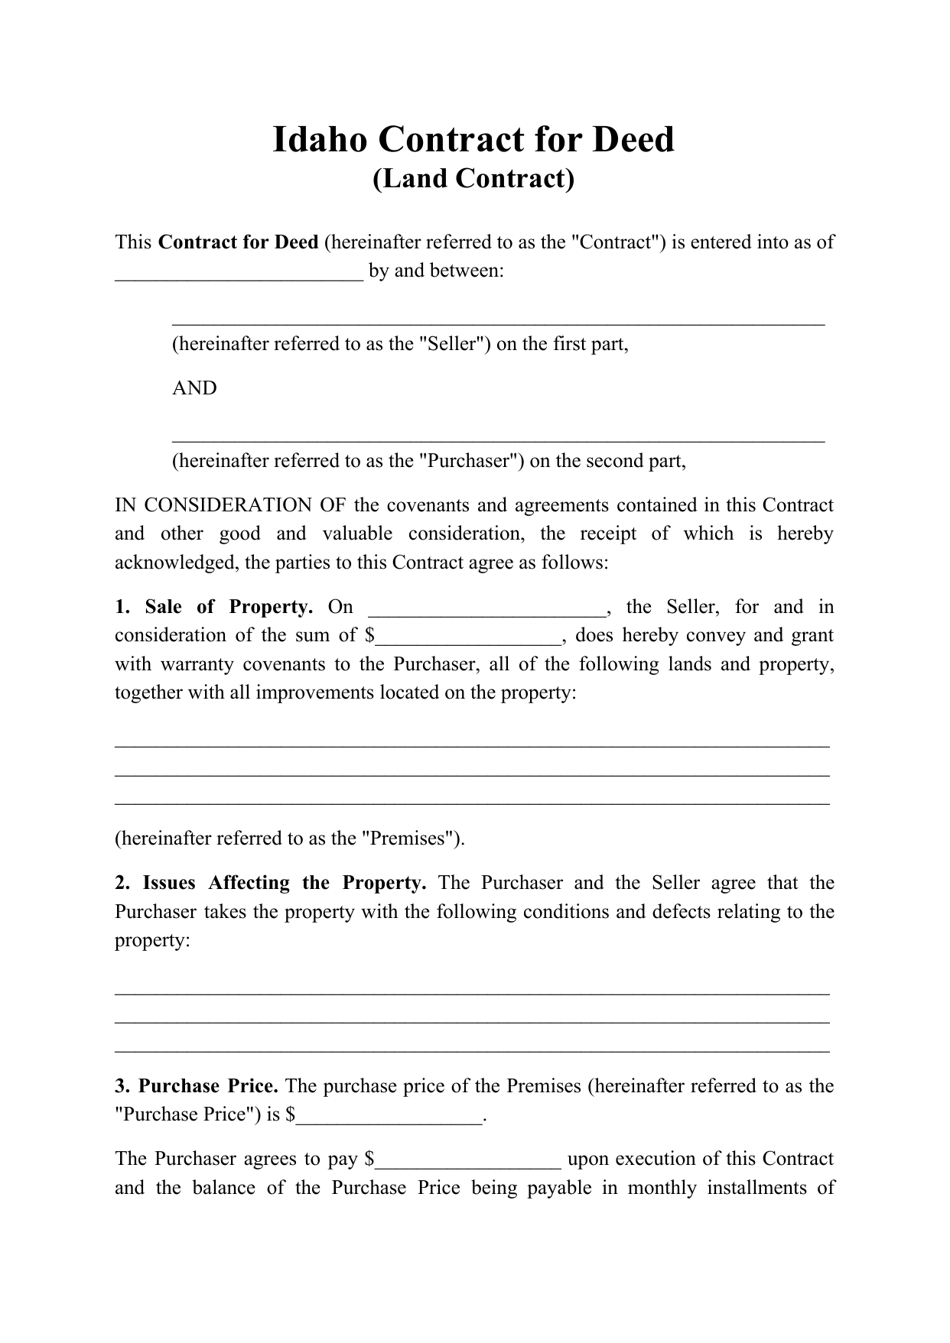 Contract for Deed (Land Contract) - Idaho, Page 1